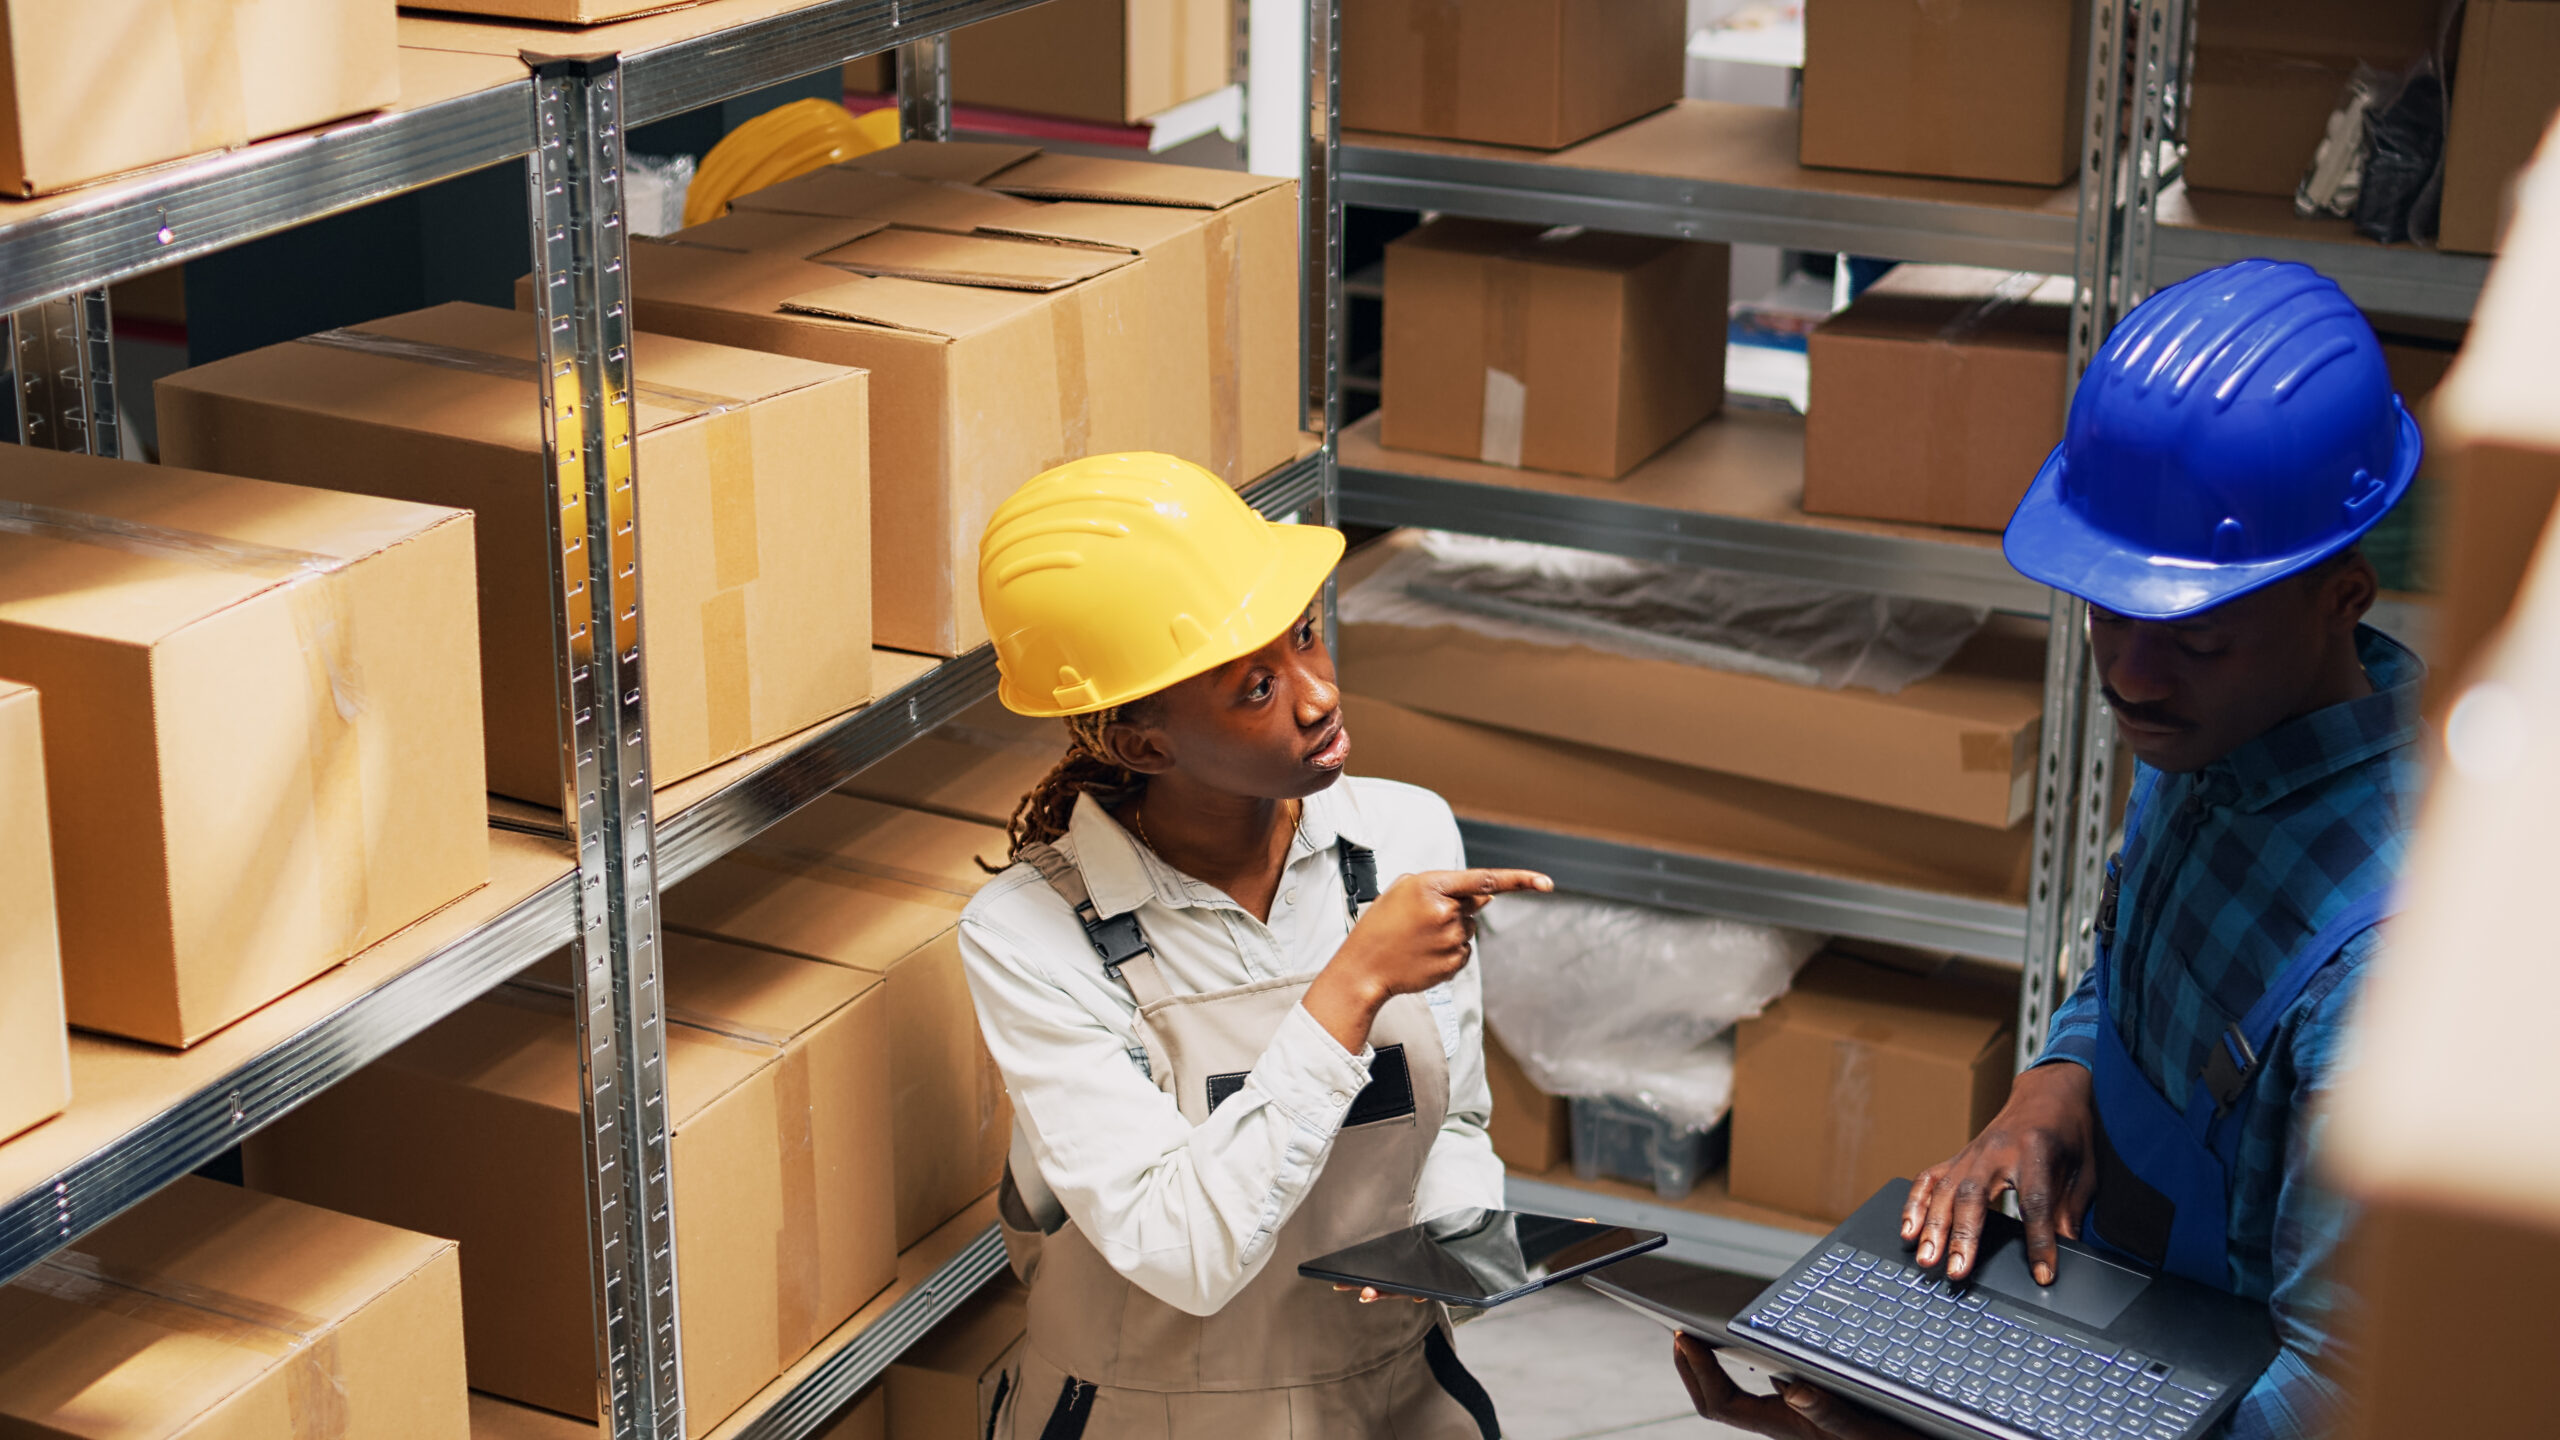 10 REASONS TO EARN AN MSC IN LOGISTICS AND SUPPLY CHAIN MANAGEMENT